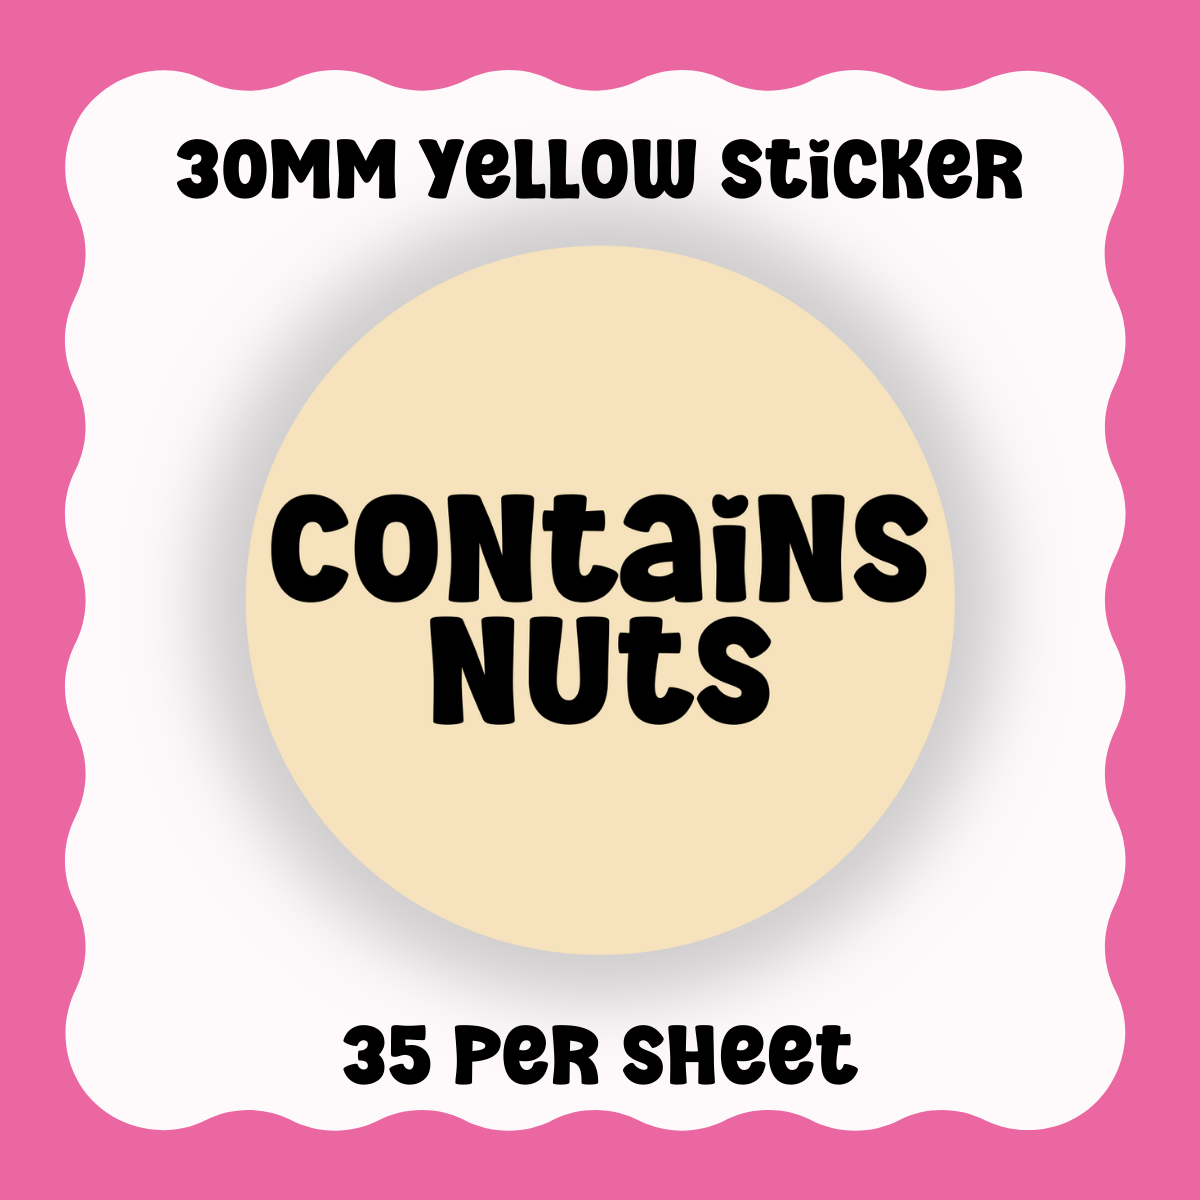 Contains Nuts - Text only